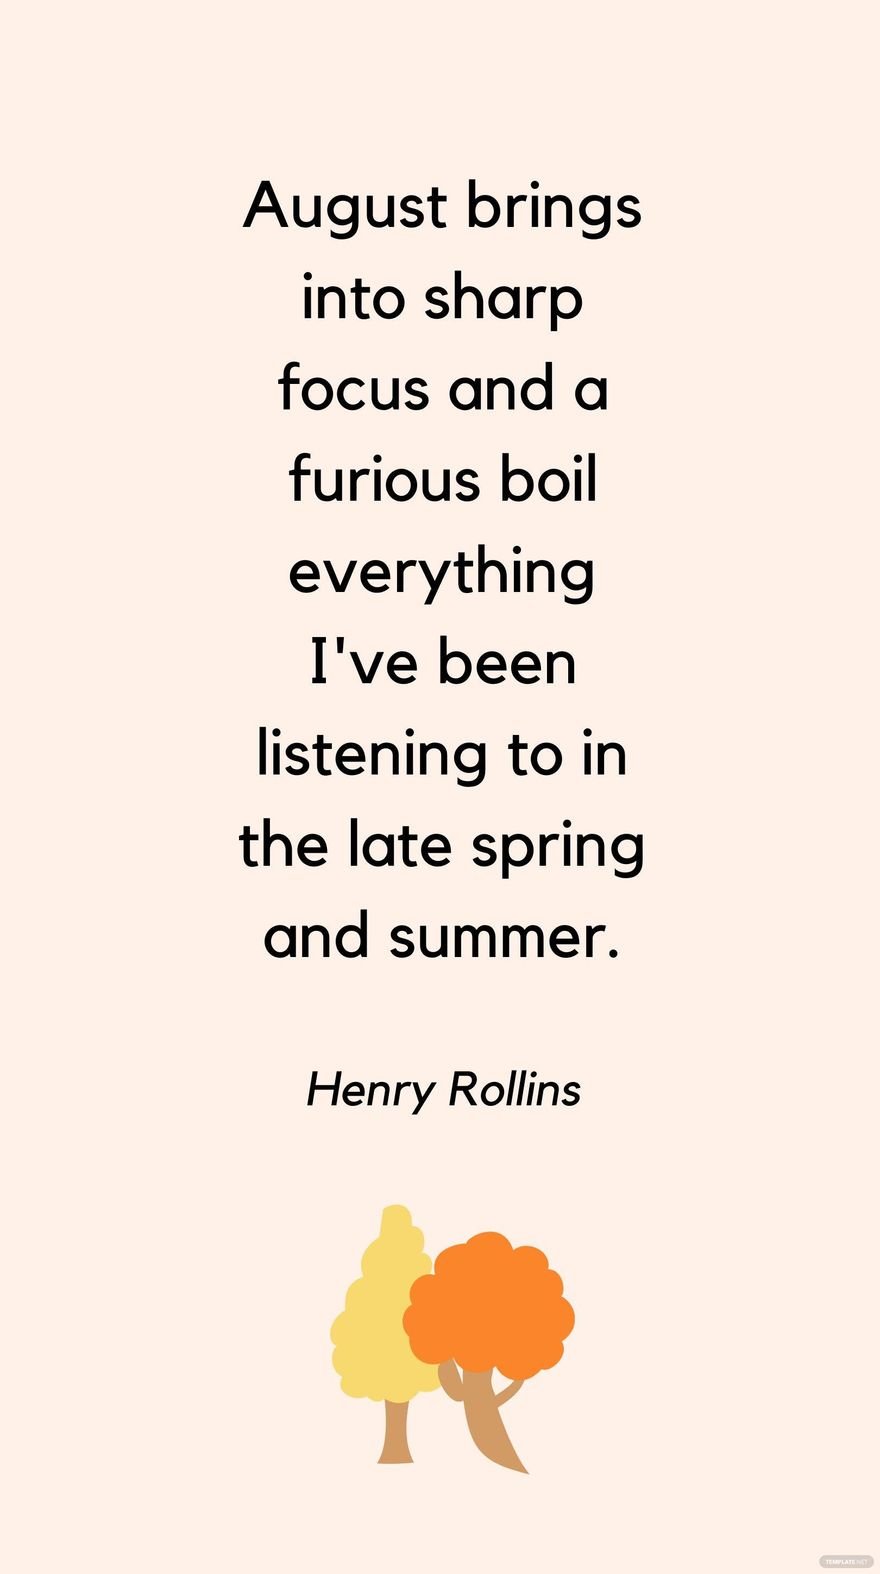 Free Henry Rollins - August brings into sharp focus and a furious boil everything I've been listening to in the late spring and summer. in JPG